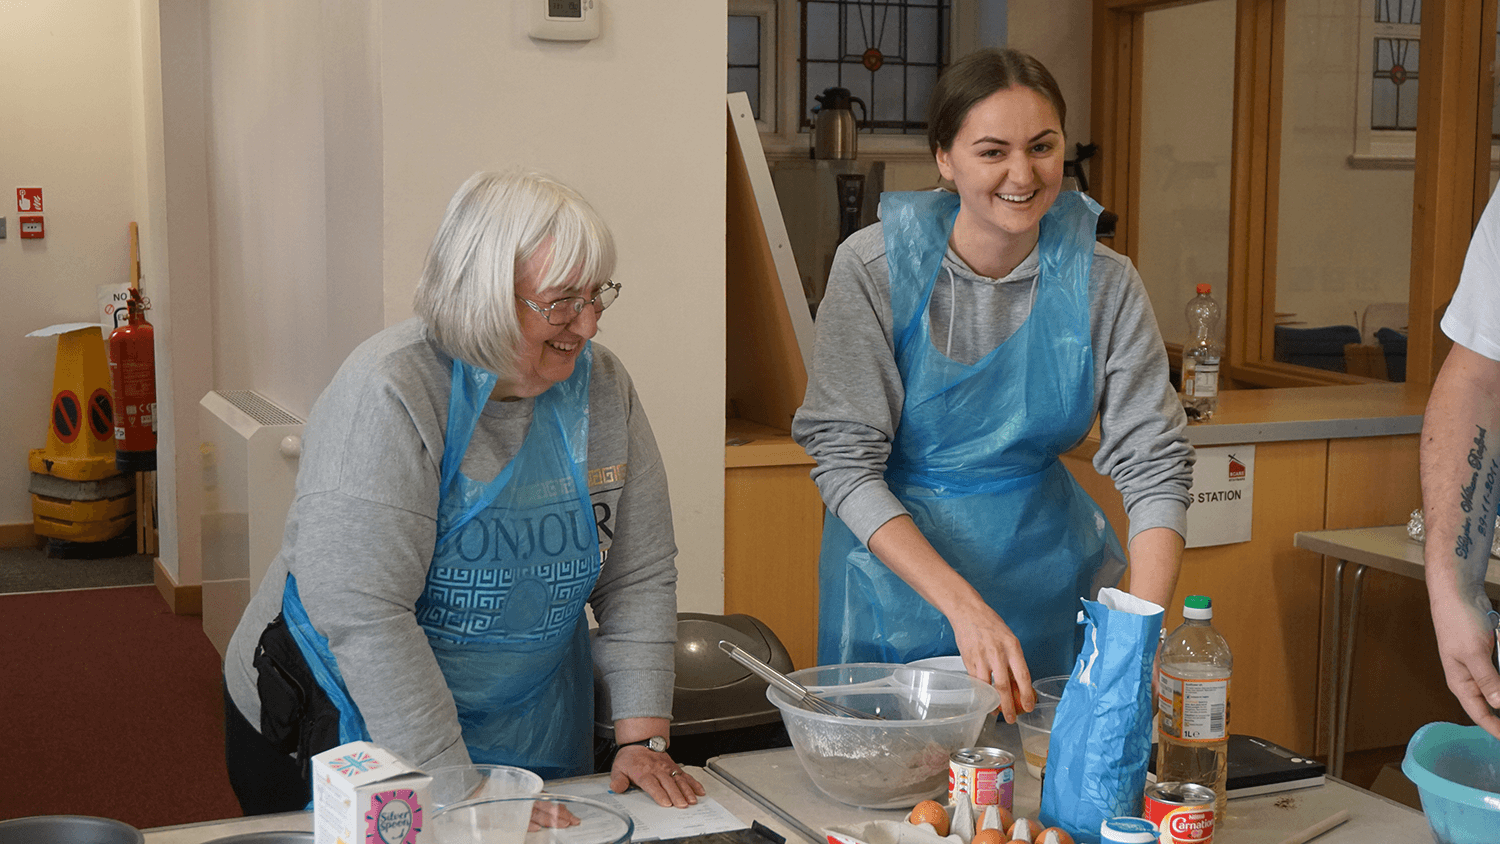 Two women baking and smiling at the camera